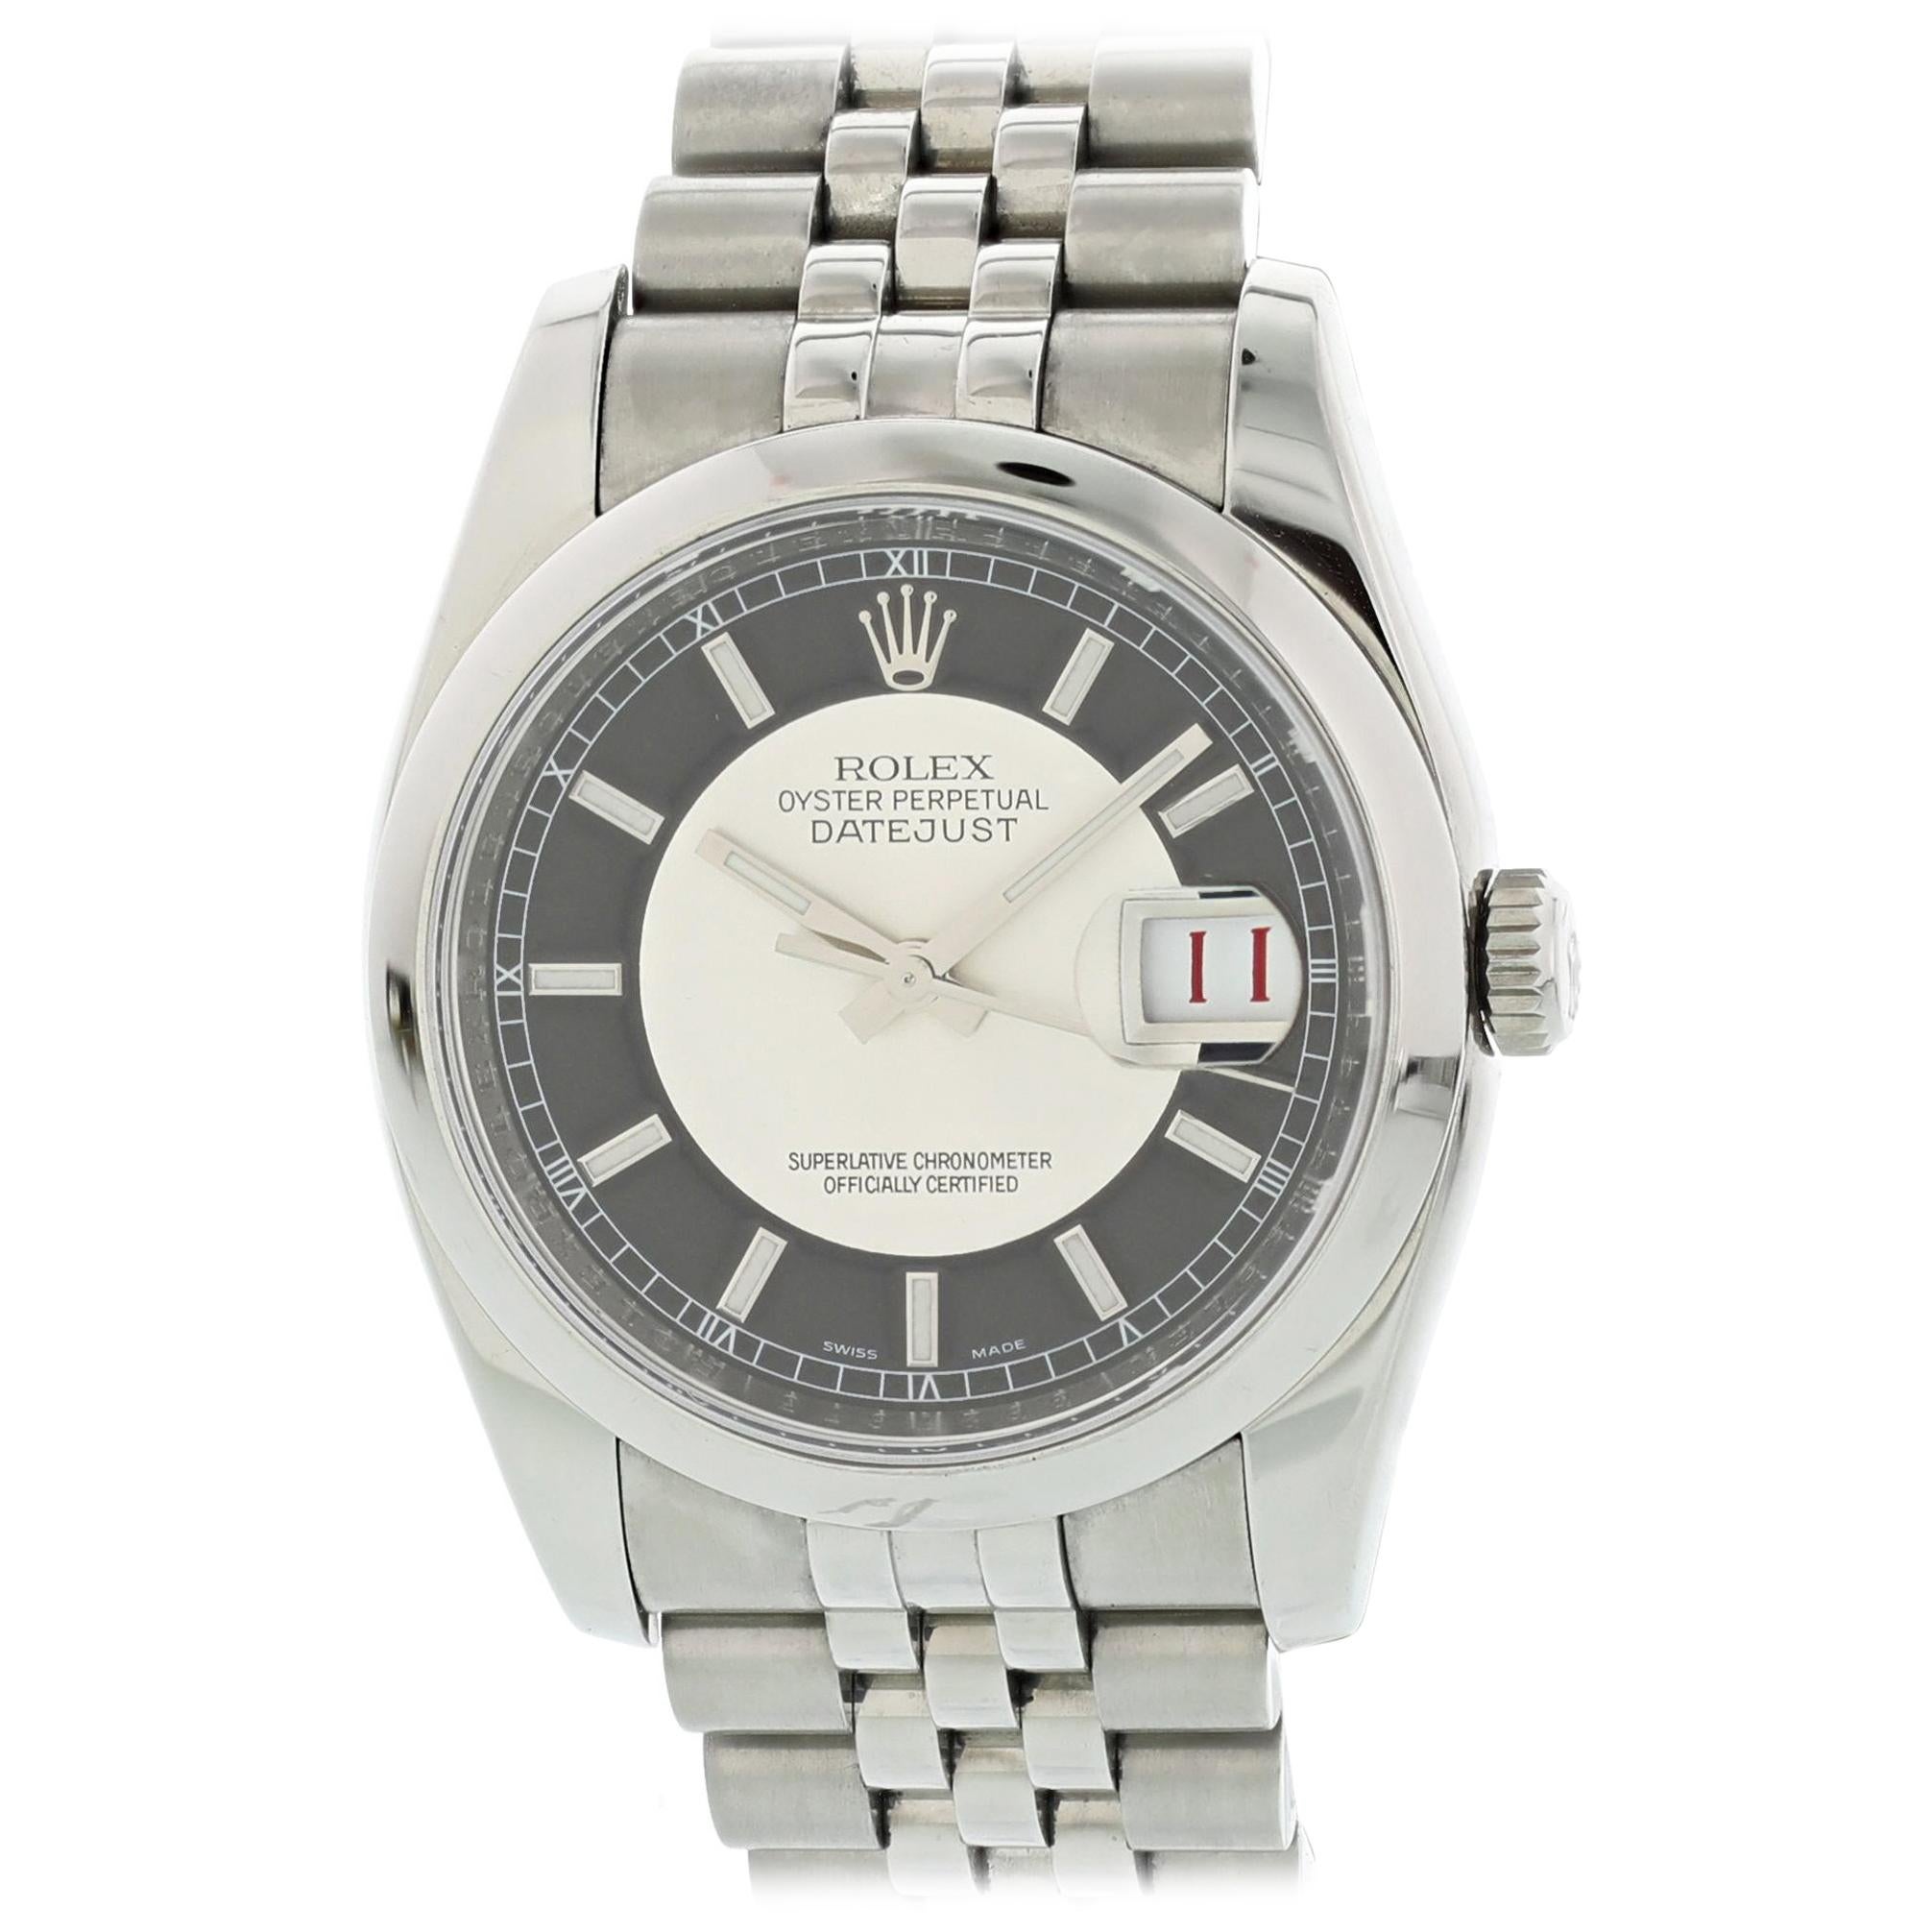 Rolex Oyster Perpetual Datejust 116200 Tuxedo Dial Men's Watch